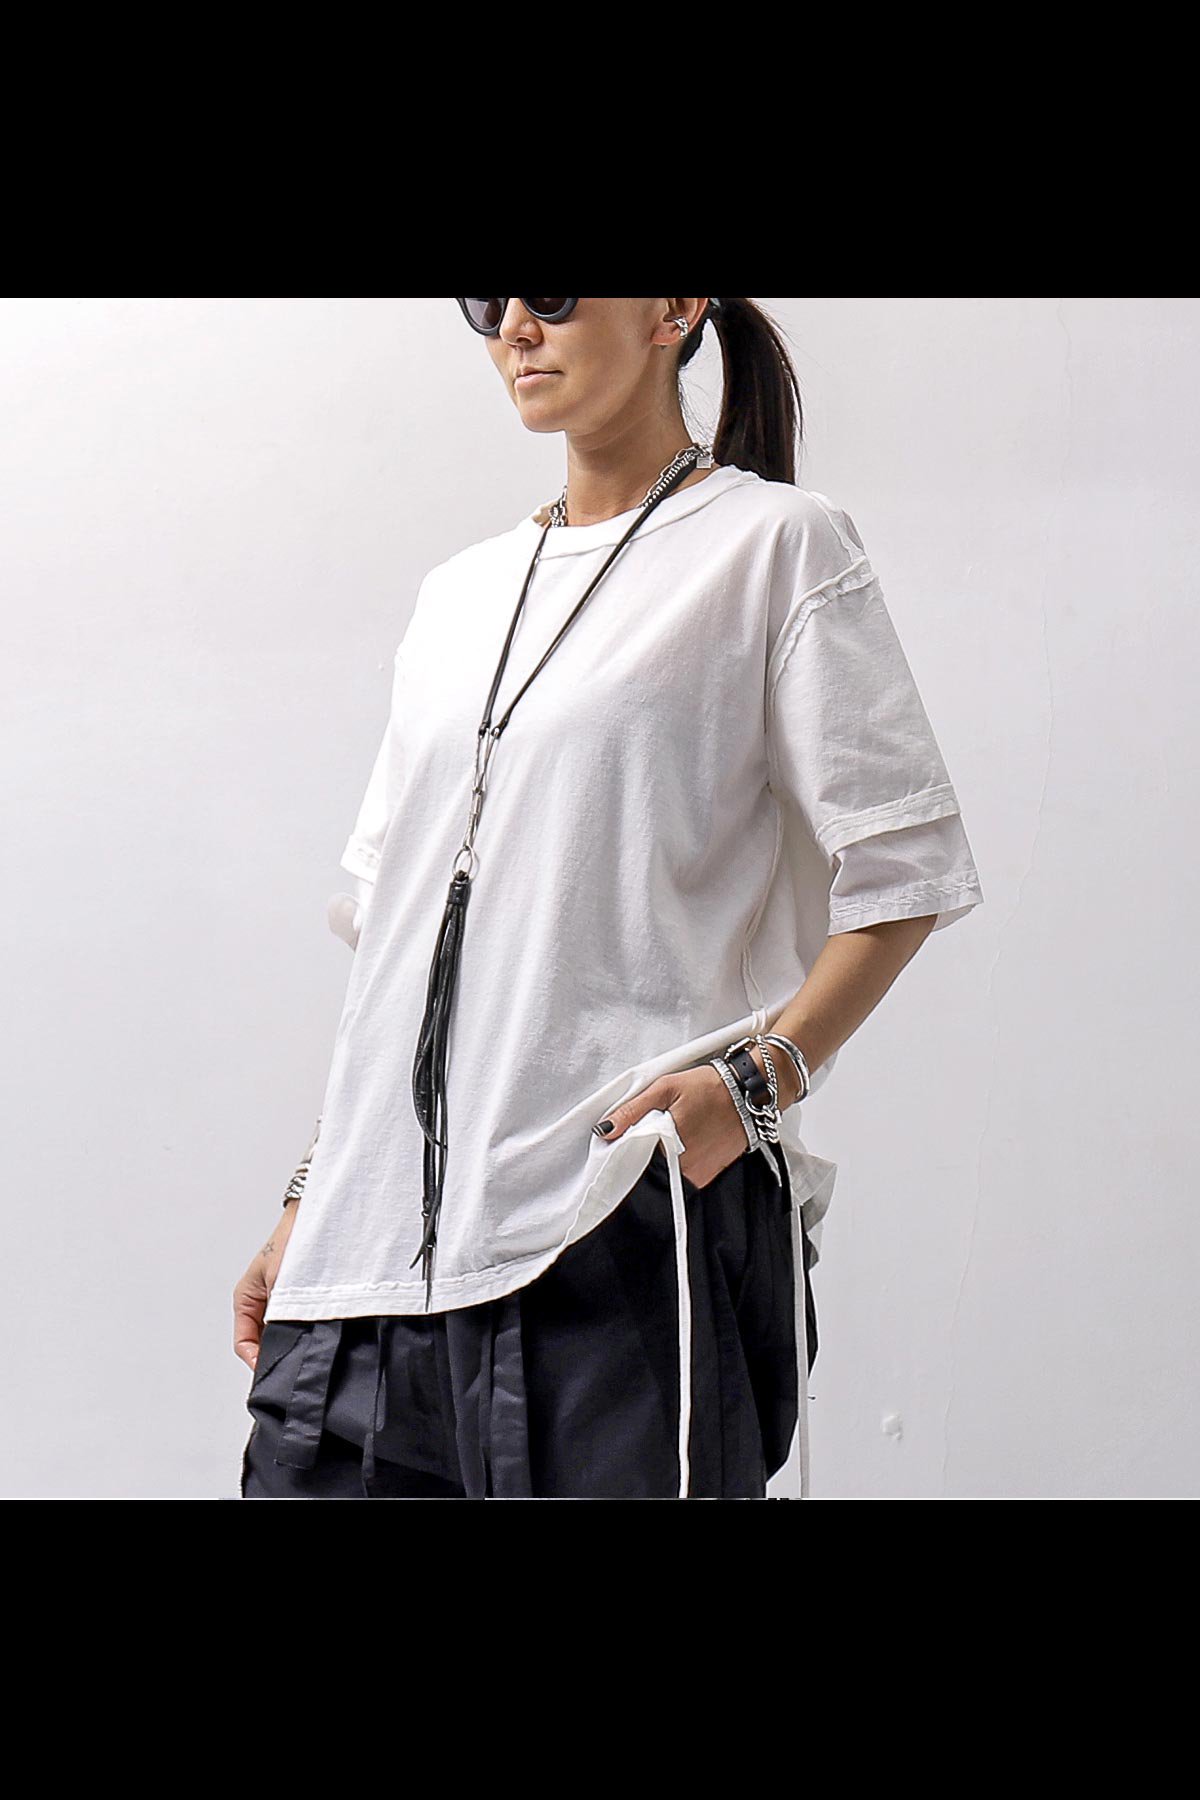 <img class='new_mark_img1' src='https://img.shop-pro.jp/img/new/icons8.gif' style='border:none;display:inline;margin:0px;padding:0px;width:auto;' />UNISEX HALF SLEEVE LAYERED TOP OPH33B_WHITE